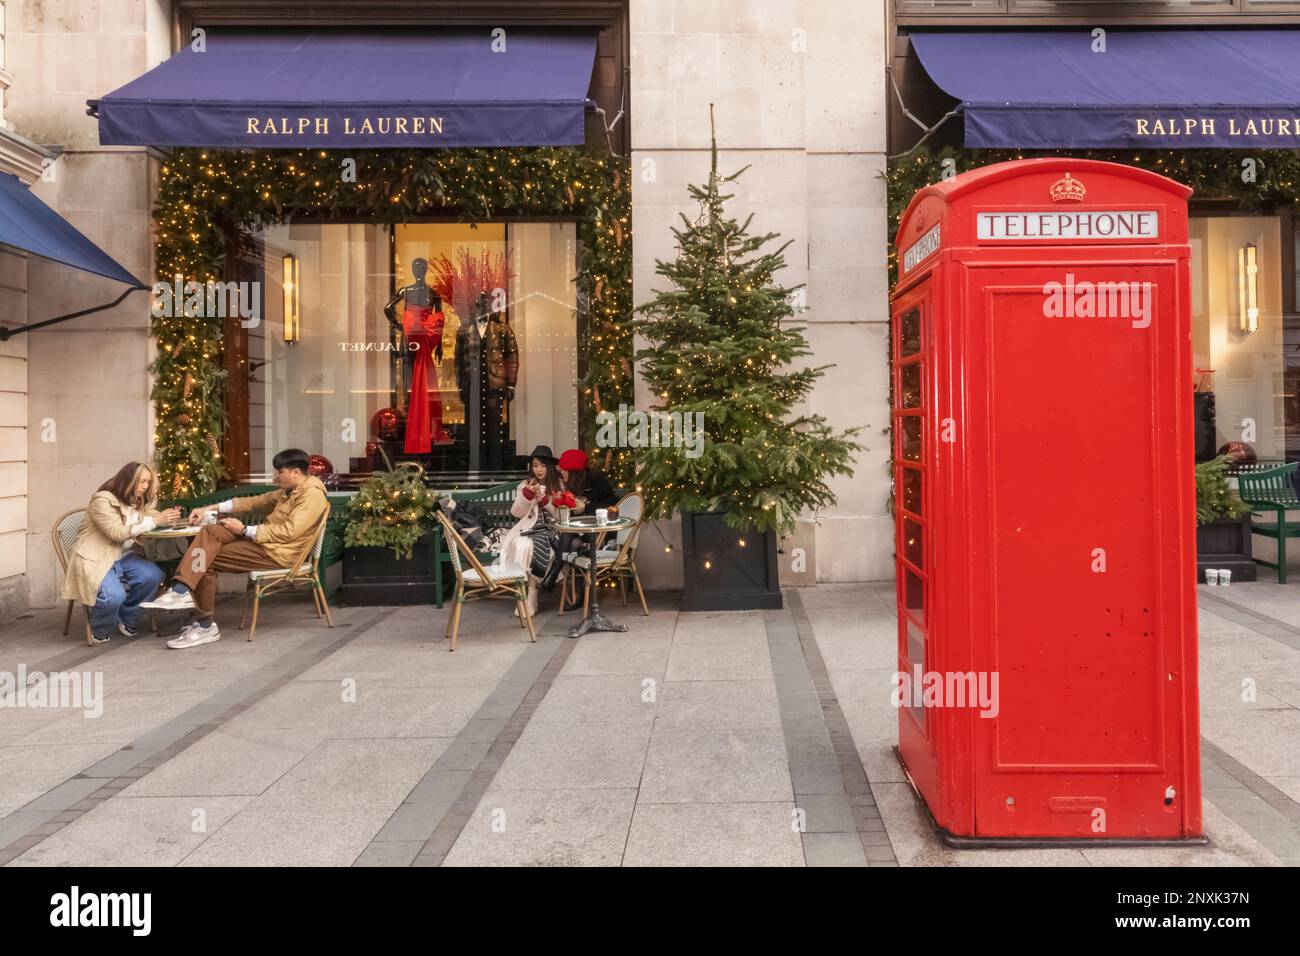 England, London, Piccadilly, New Bond Street, Exterior View of Ralph Lauren Store with Christmas Decorations and Traditional Red Telephone Box Stock Photo